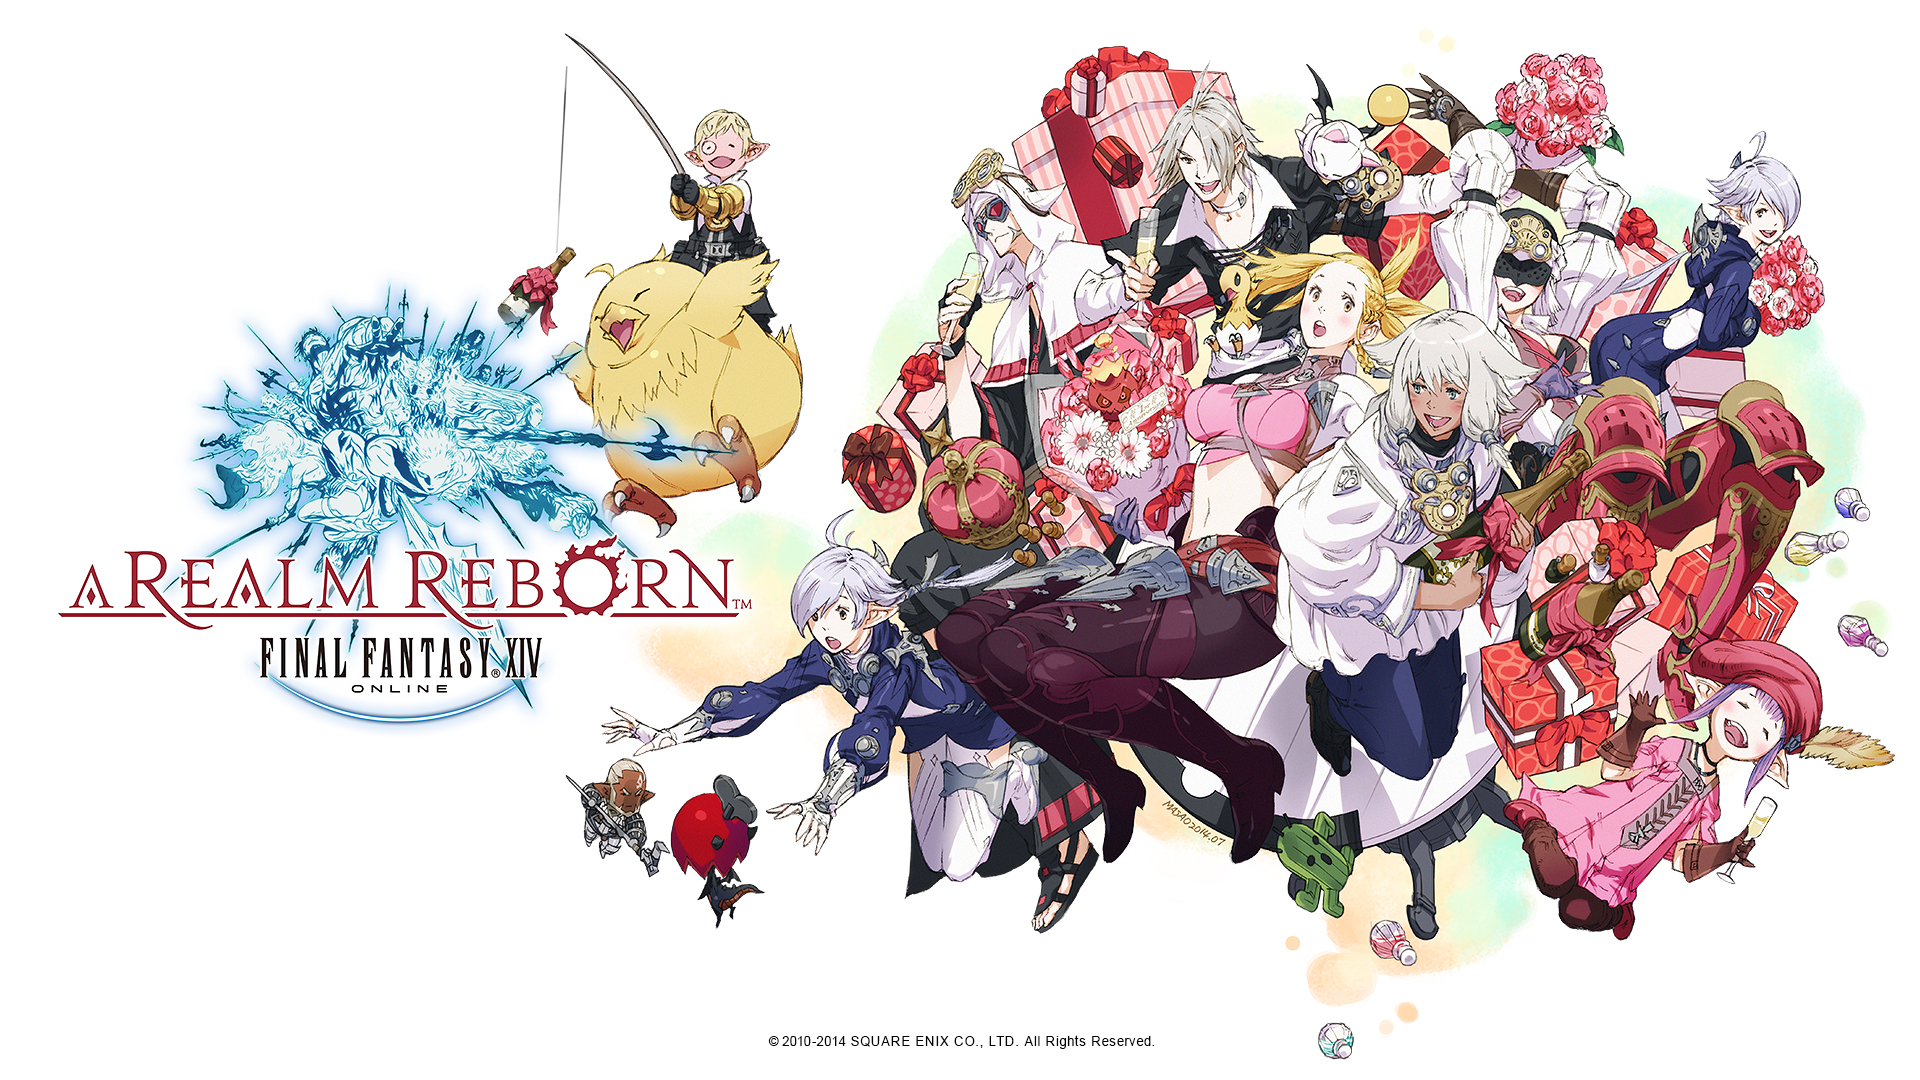 General 1920x1080 Final Fantasy XIV: A Realm Reborn MMORPG Square Enix video games video game characters